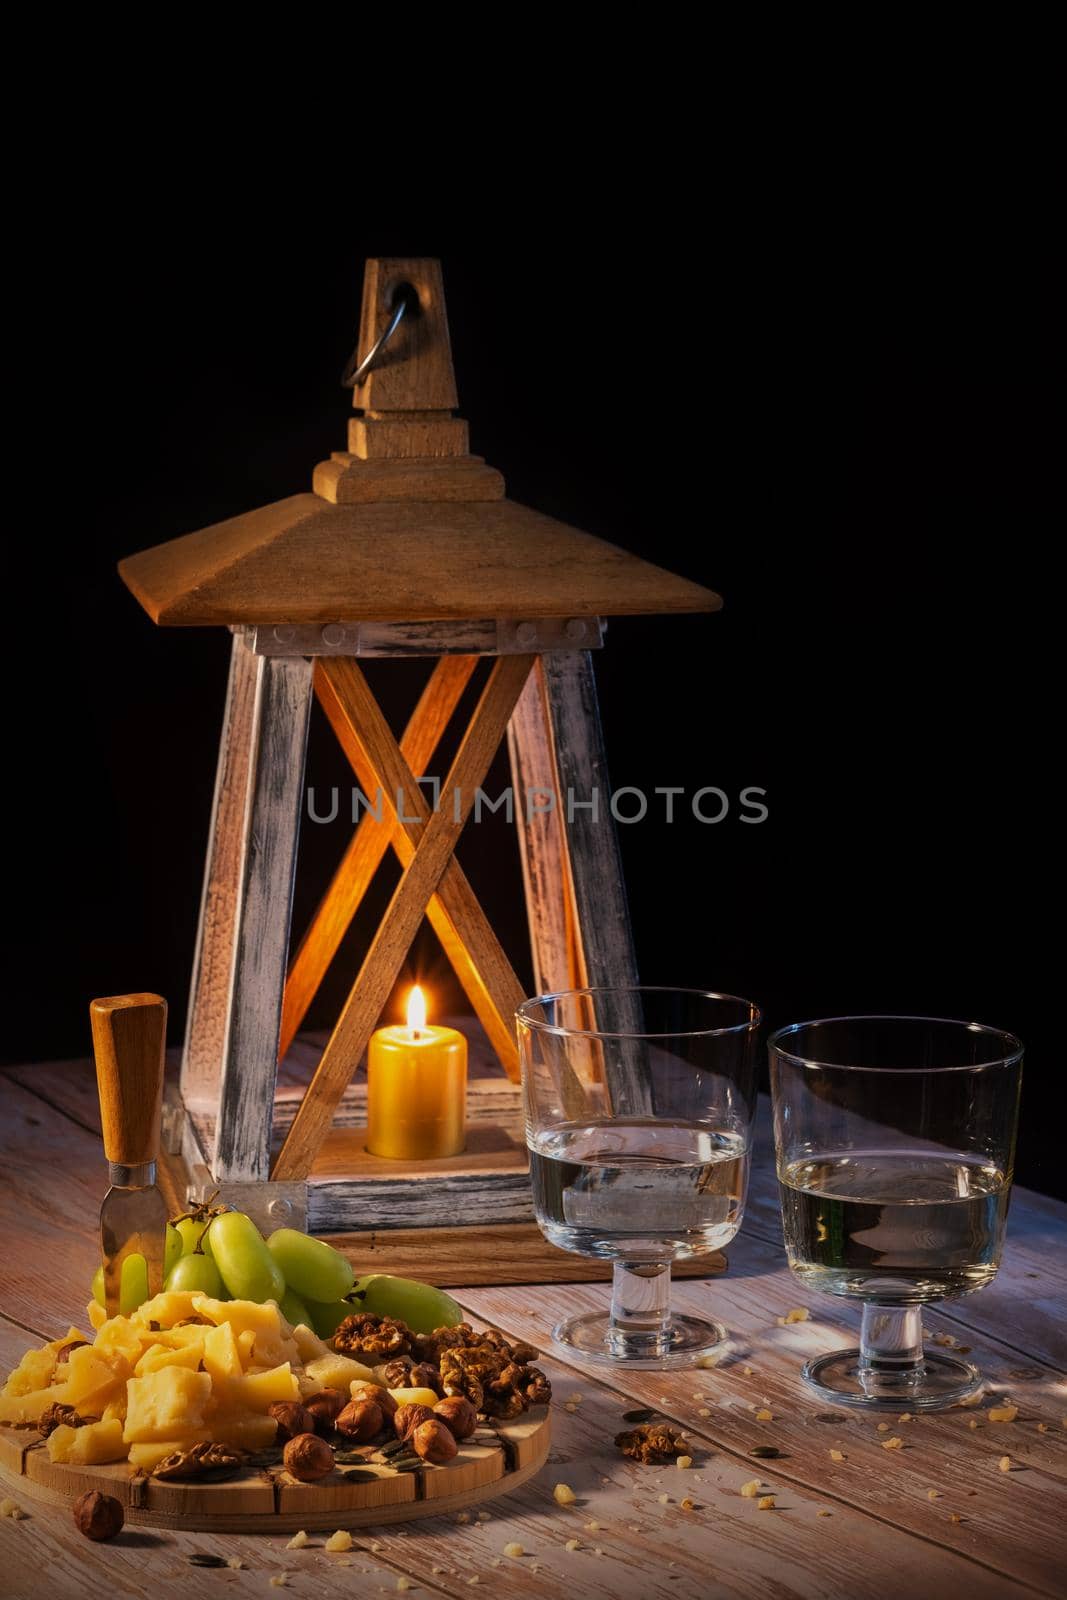 Cheese plate with a variety of snacks on the table with two glasses of wine by candlelight by Lobachad